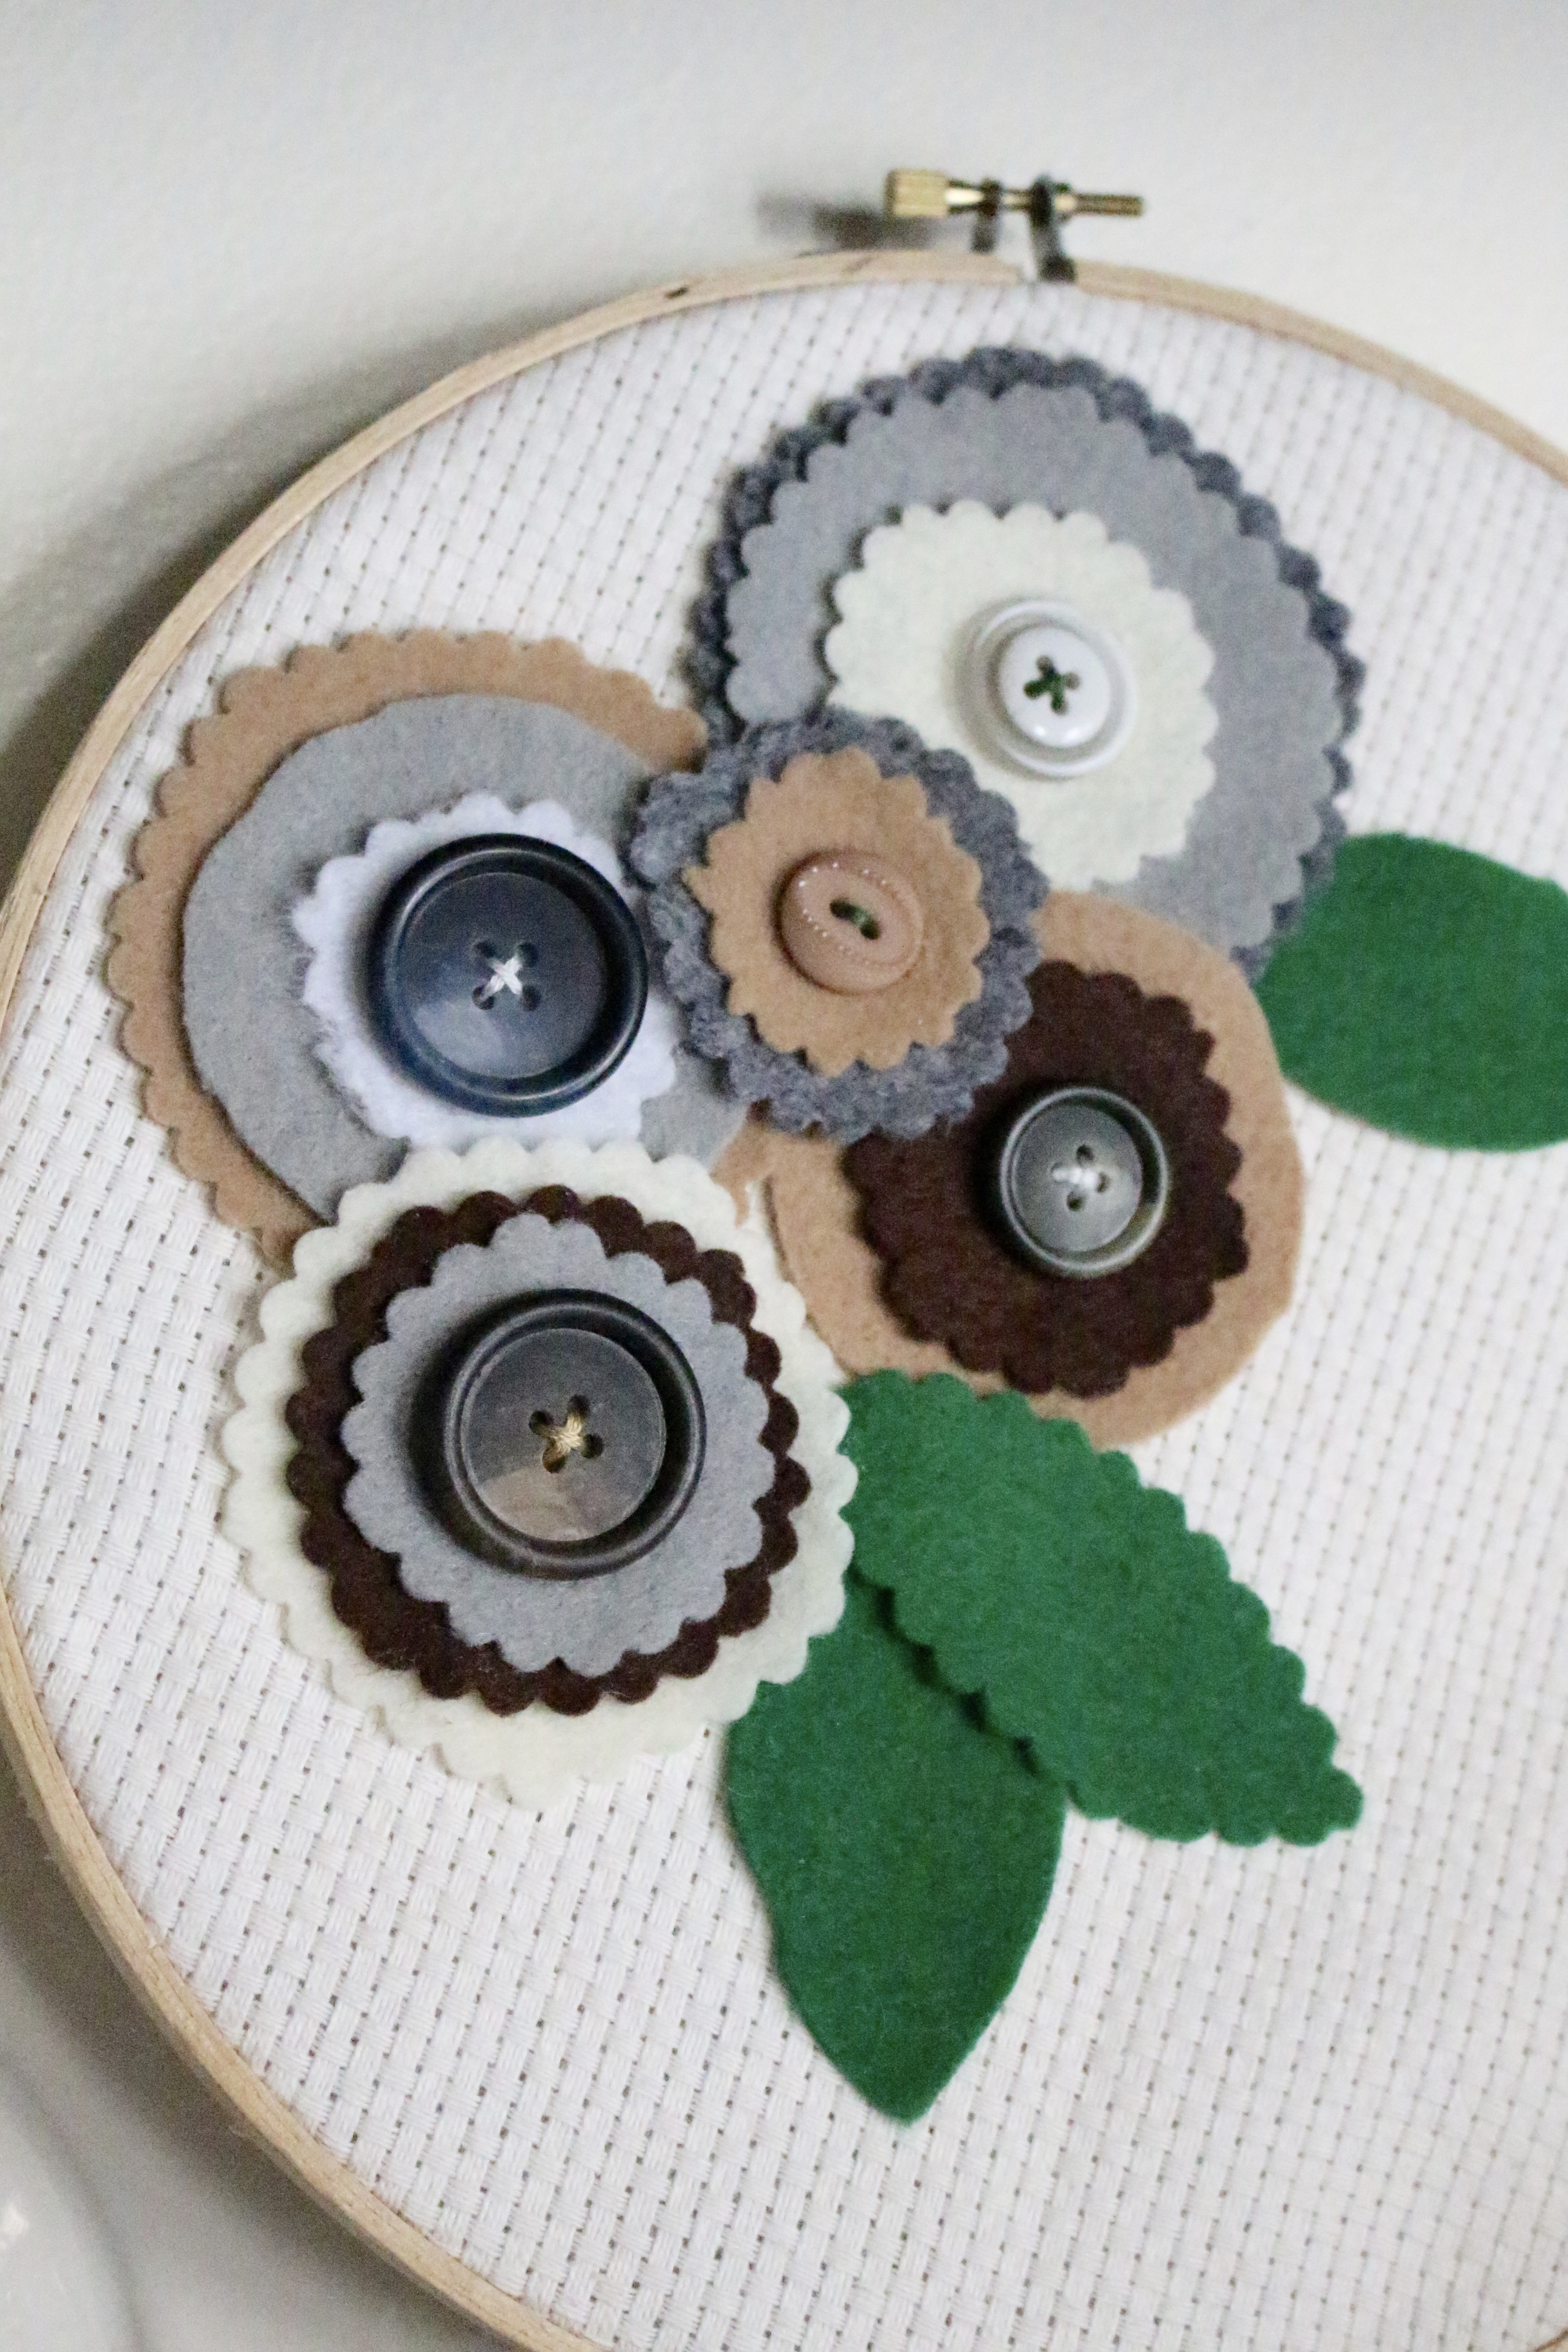 Embroidery Hoop Art with Felt Flowers by www.whitecottagehomeandliving.com